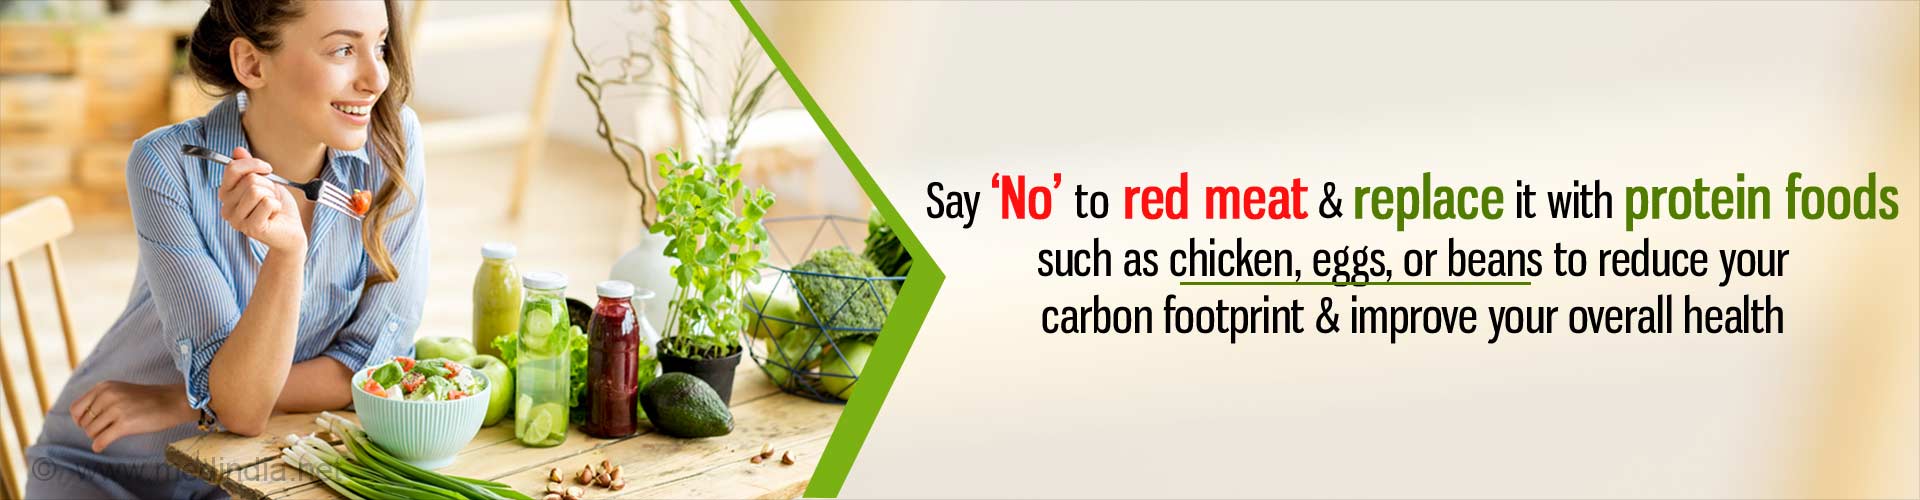 Say ''No'' to red meat and replace it with protein foods such as chicken, eggs, or beans to reduce our carbon footprint and improve our overall health.